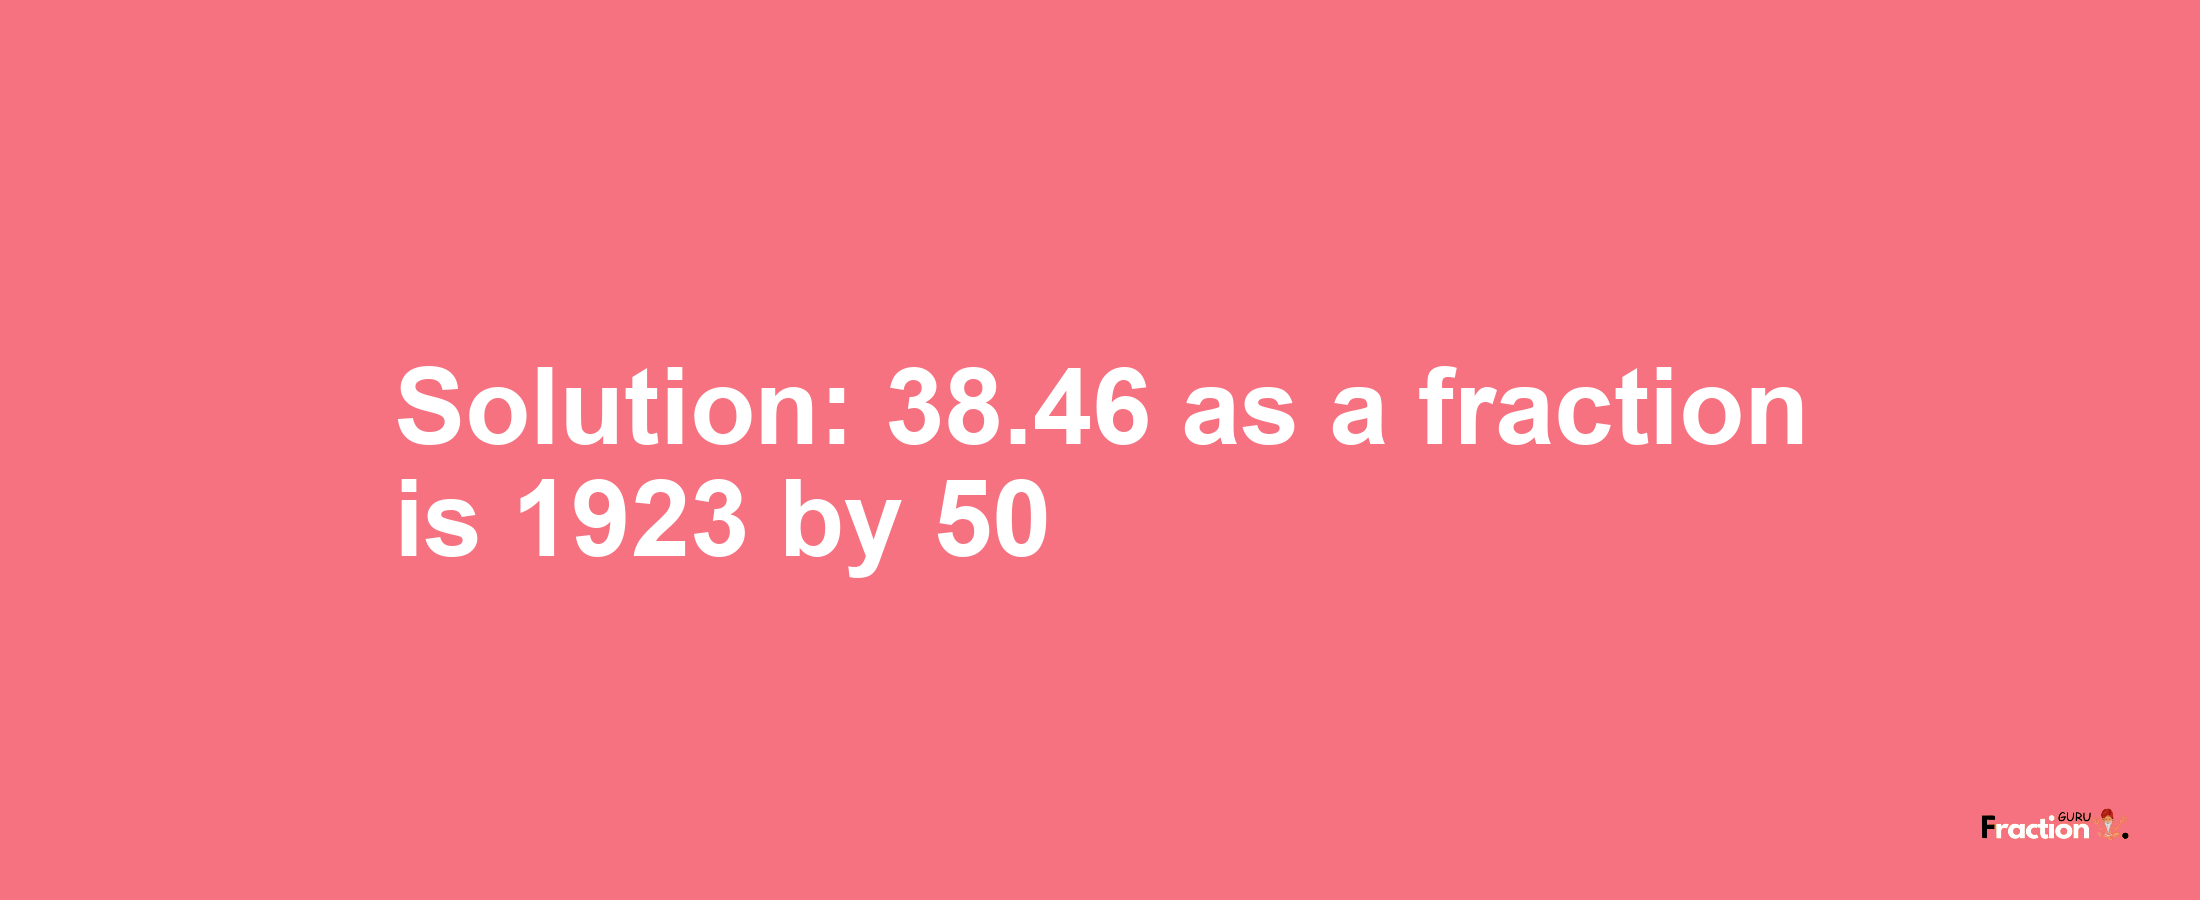 Solution:38.46 as a fraction is 1923/50